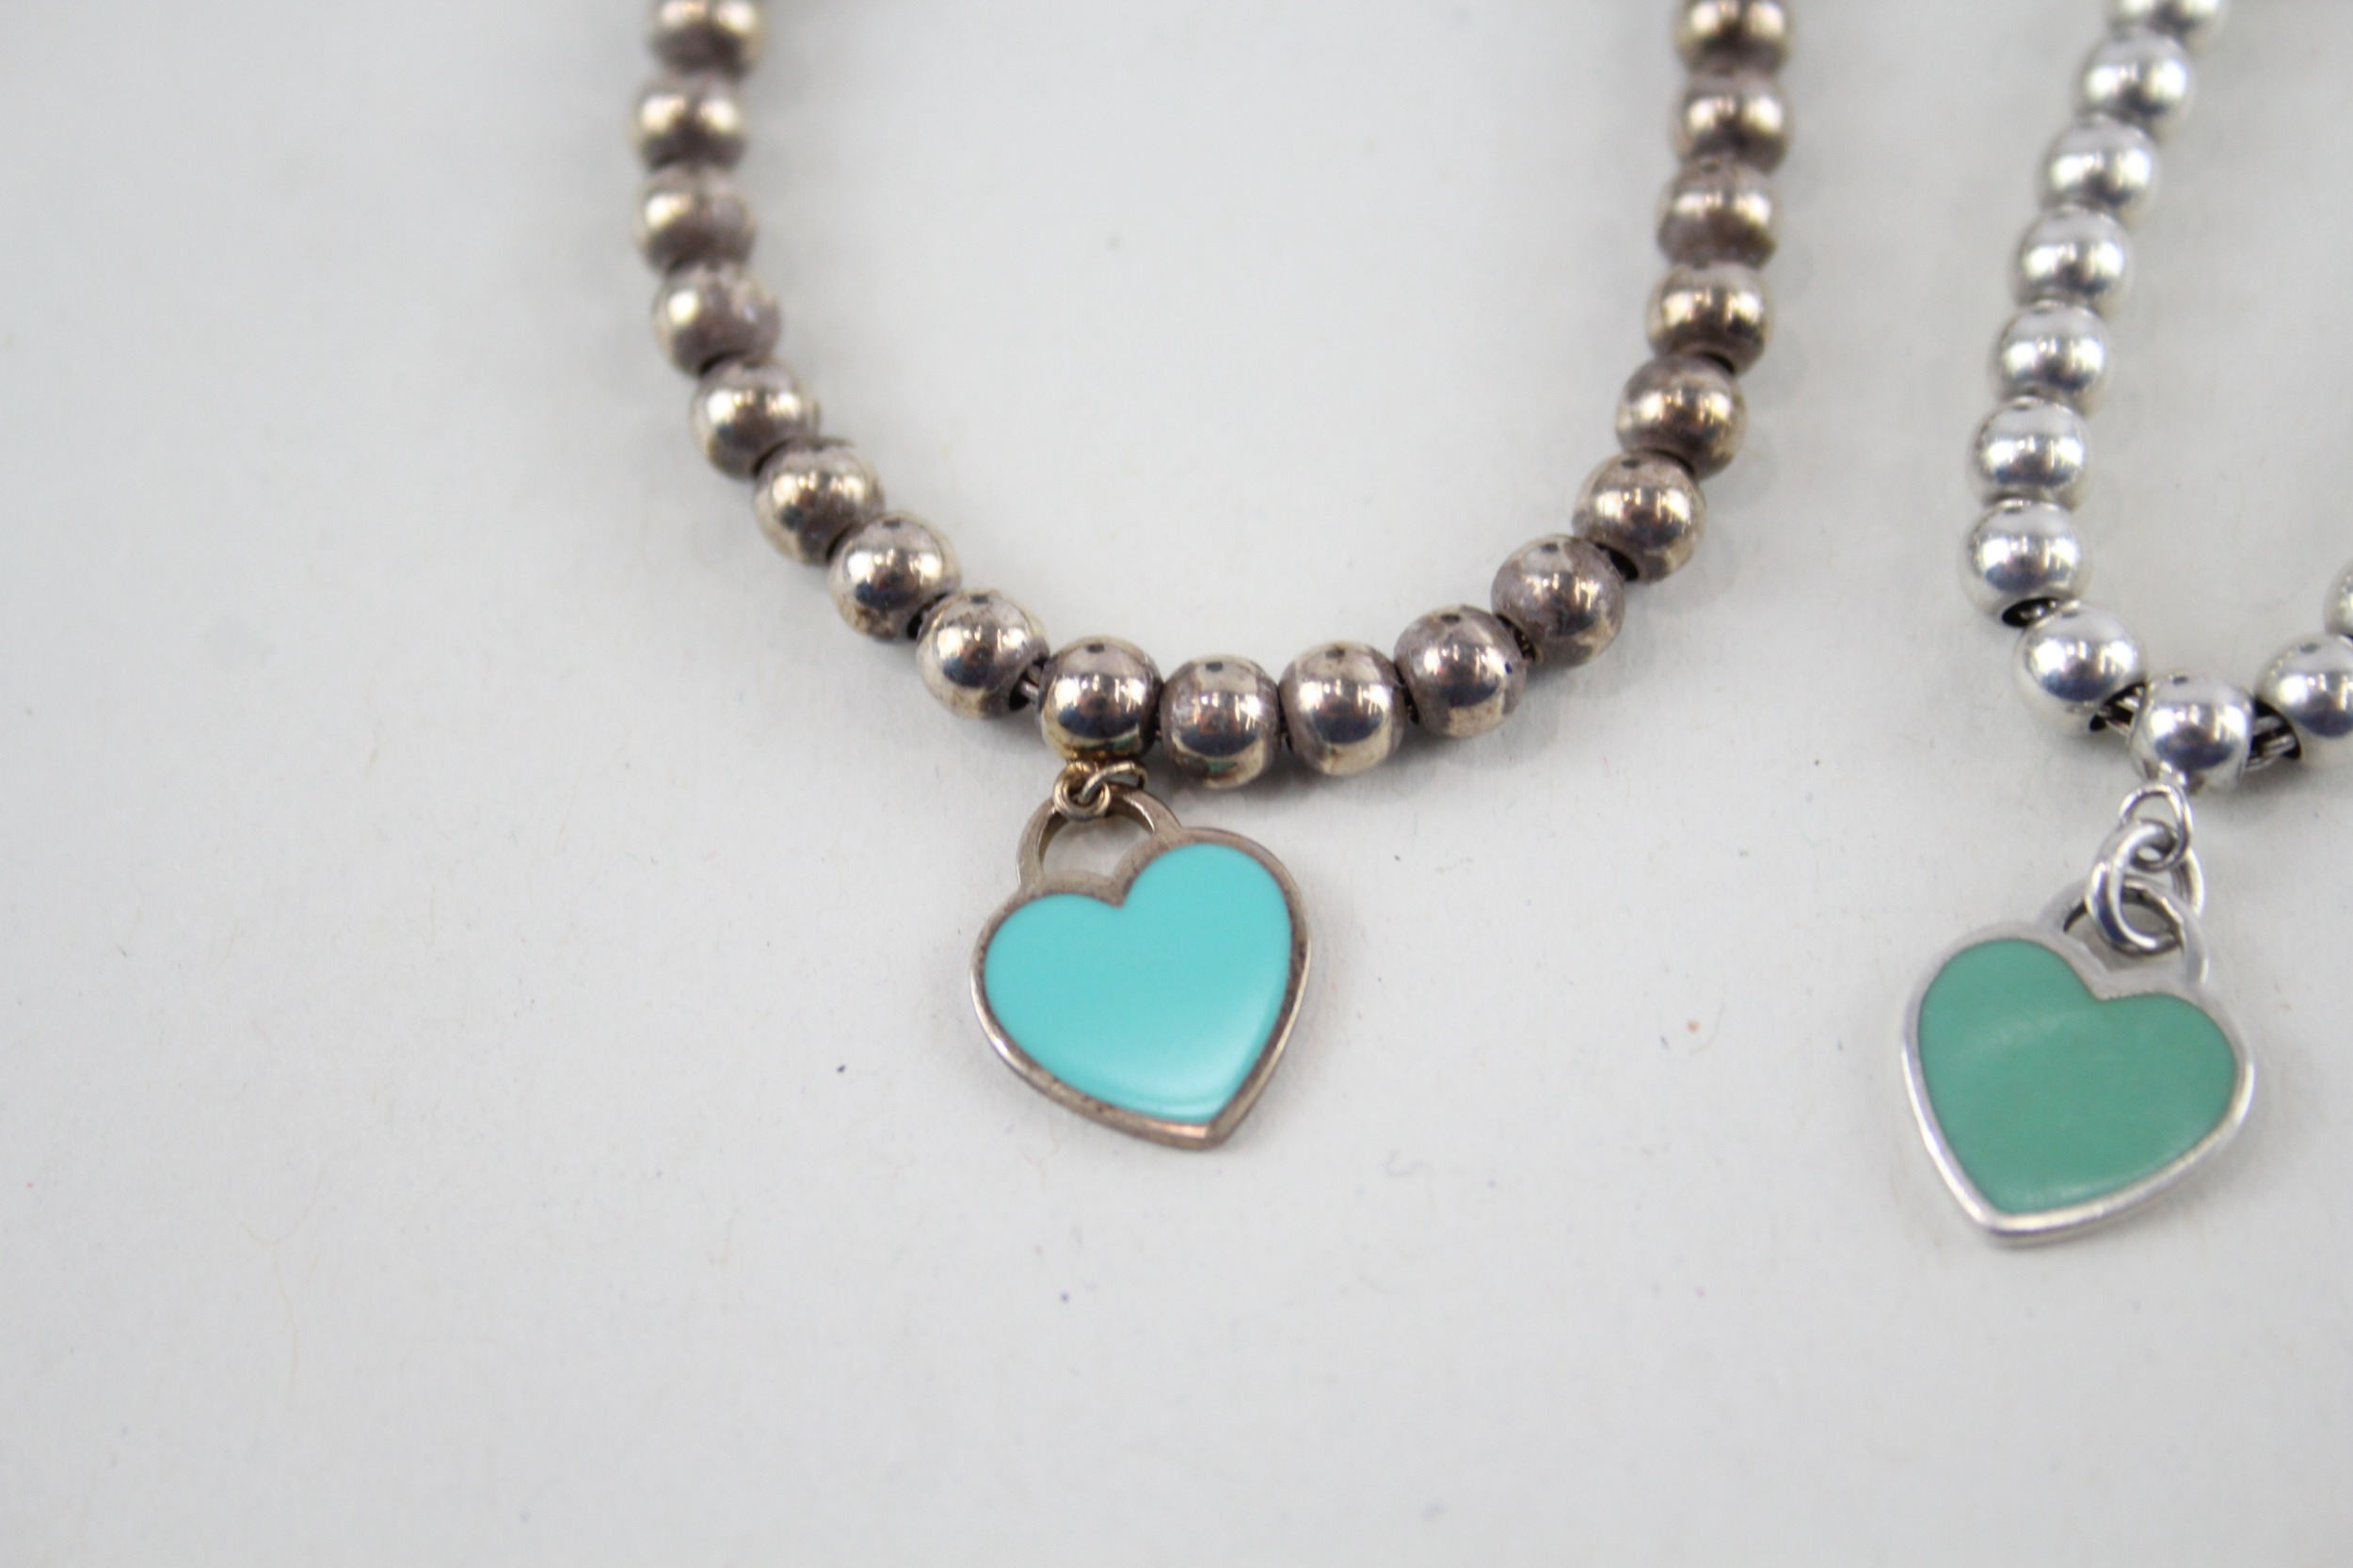 Two silver bracelets with enamel heart charms by designer Tiffany & Co (11g) - Image 2 of 7